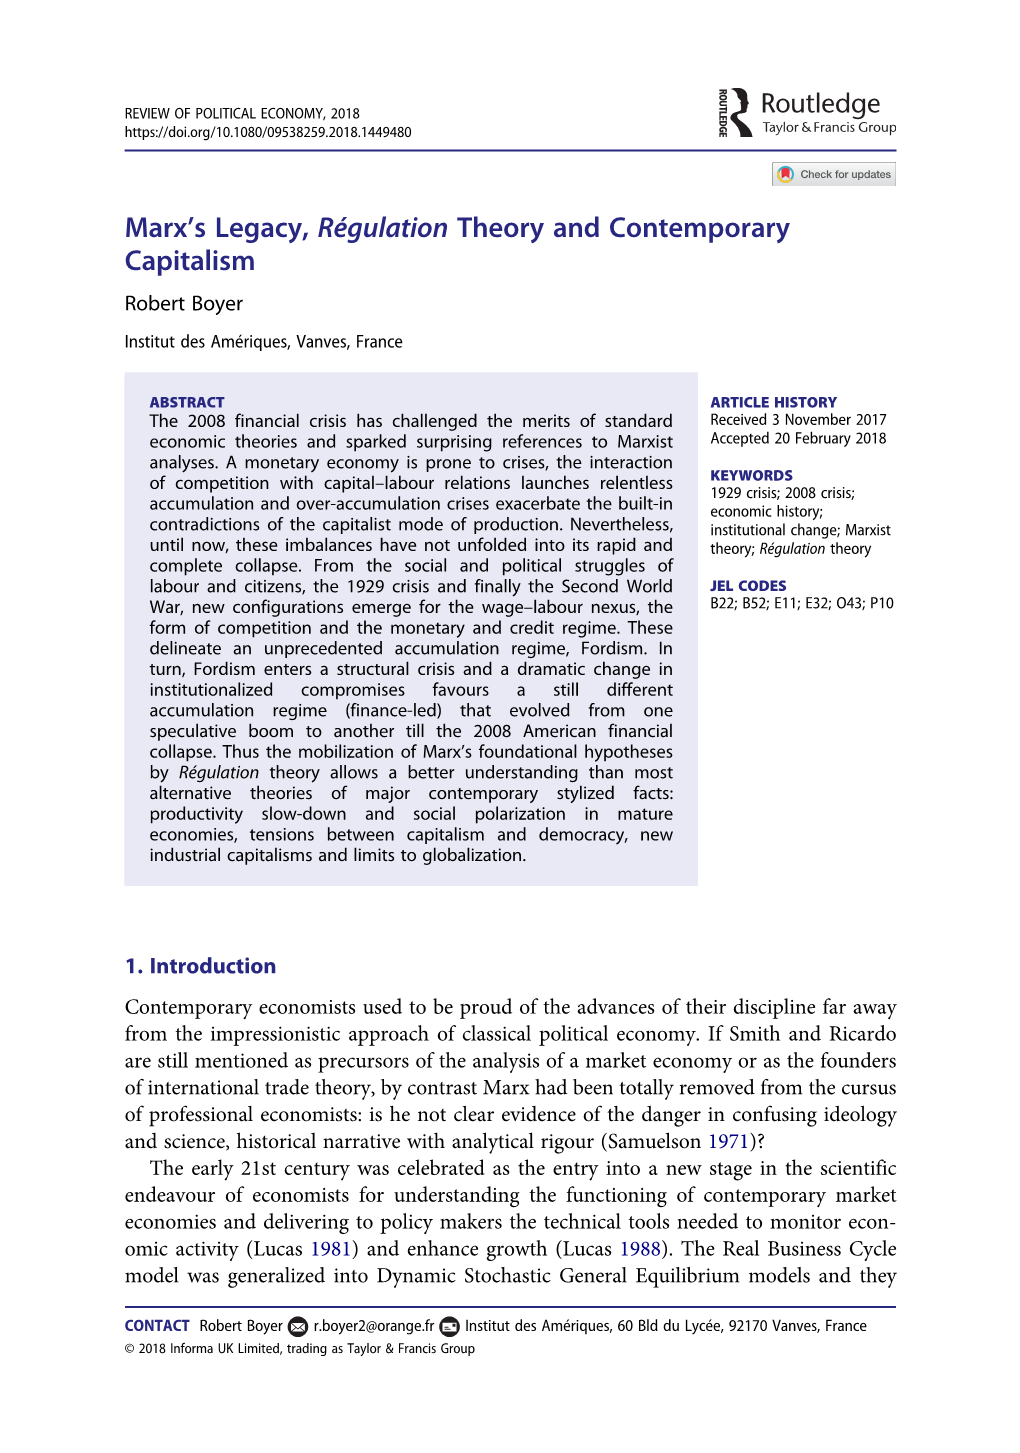 Marx's Legacy, Régulation Theory and Contemporary Capitalism